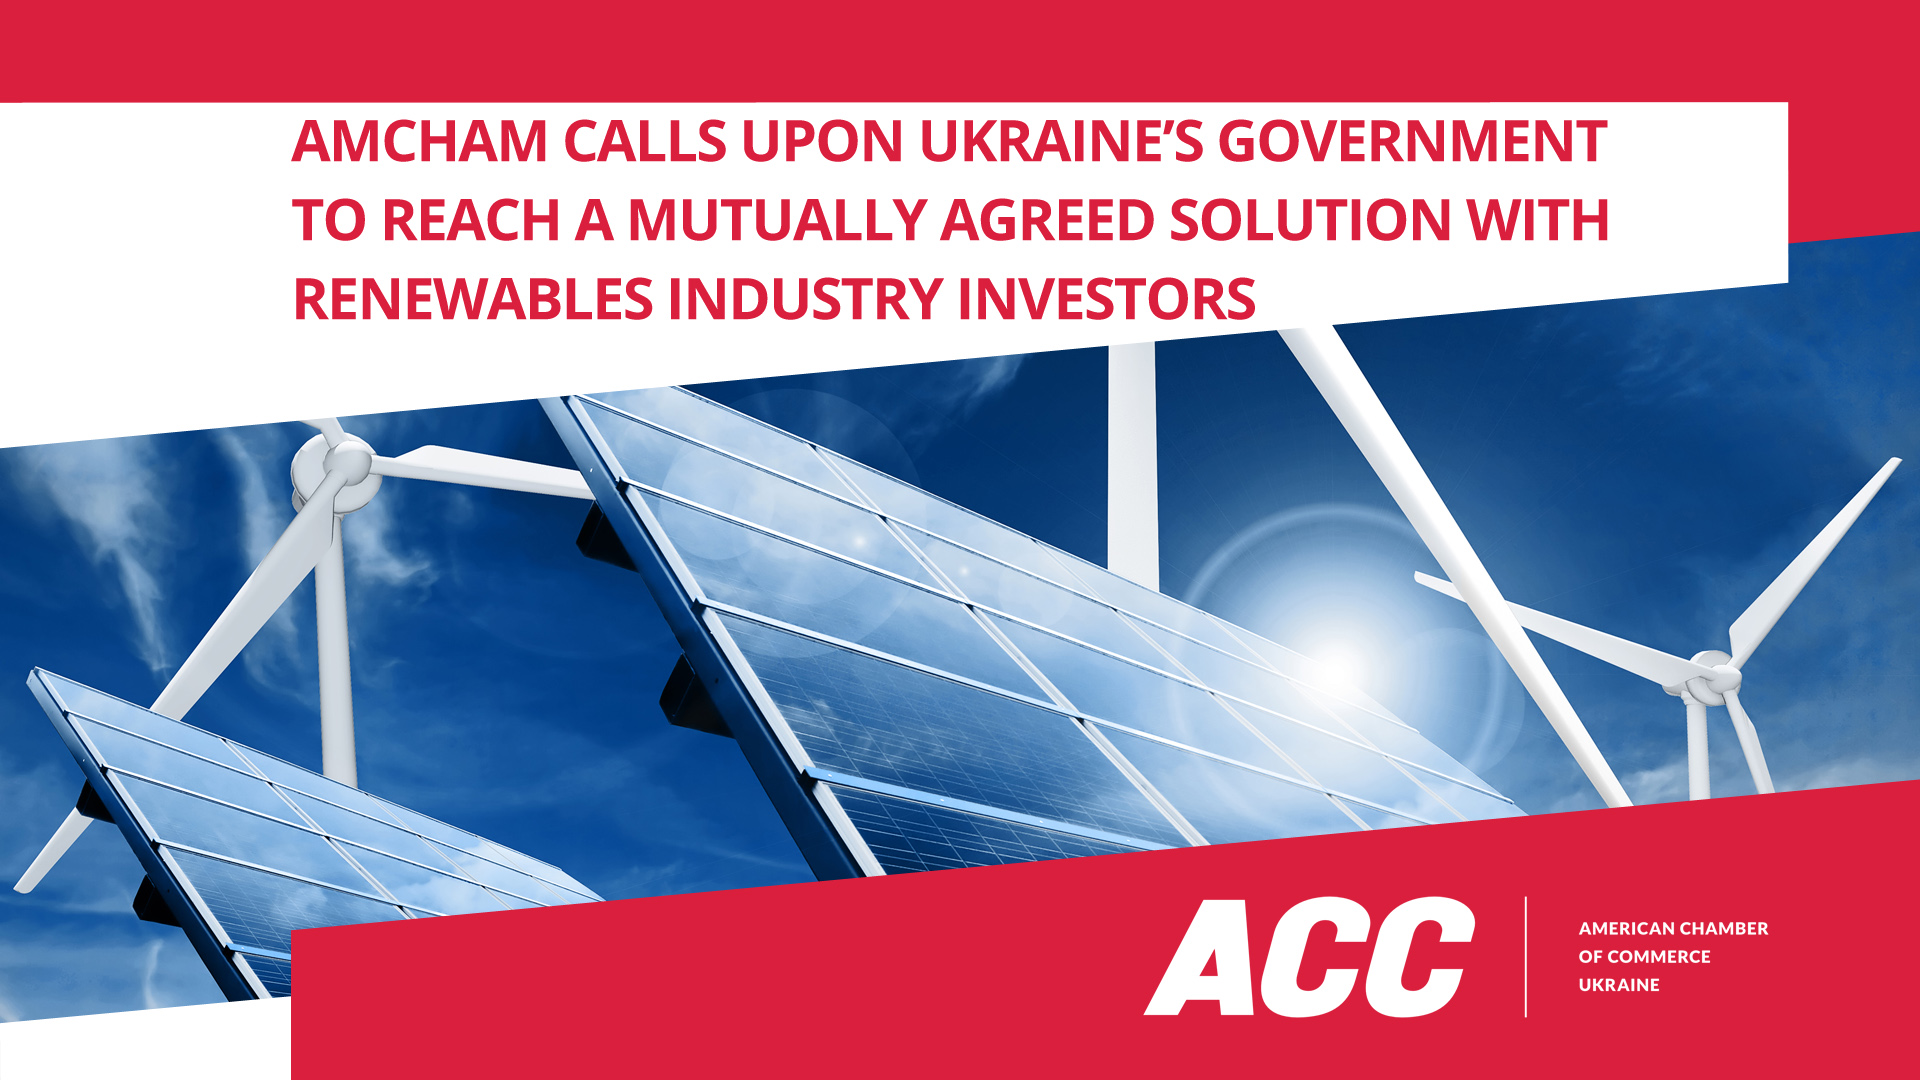 AmCham calls upon Ukraine’s Government to reach a mutually agreed solution with renewables industry investors